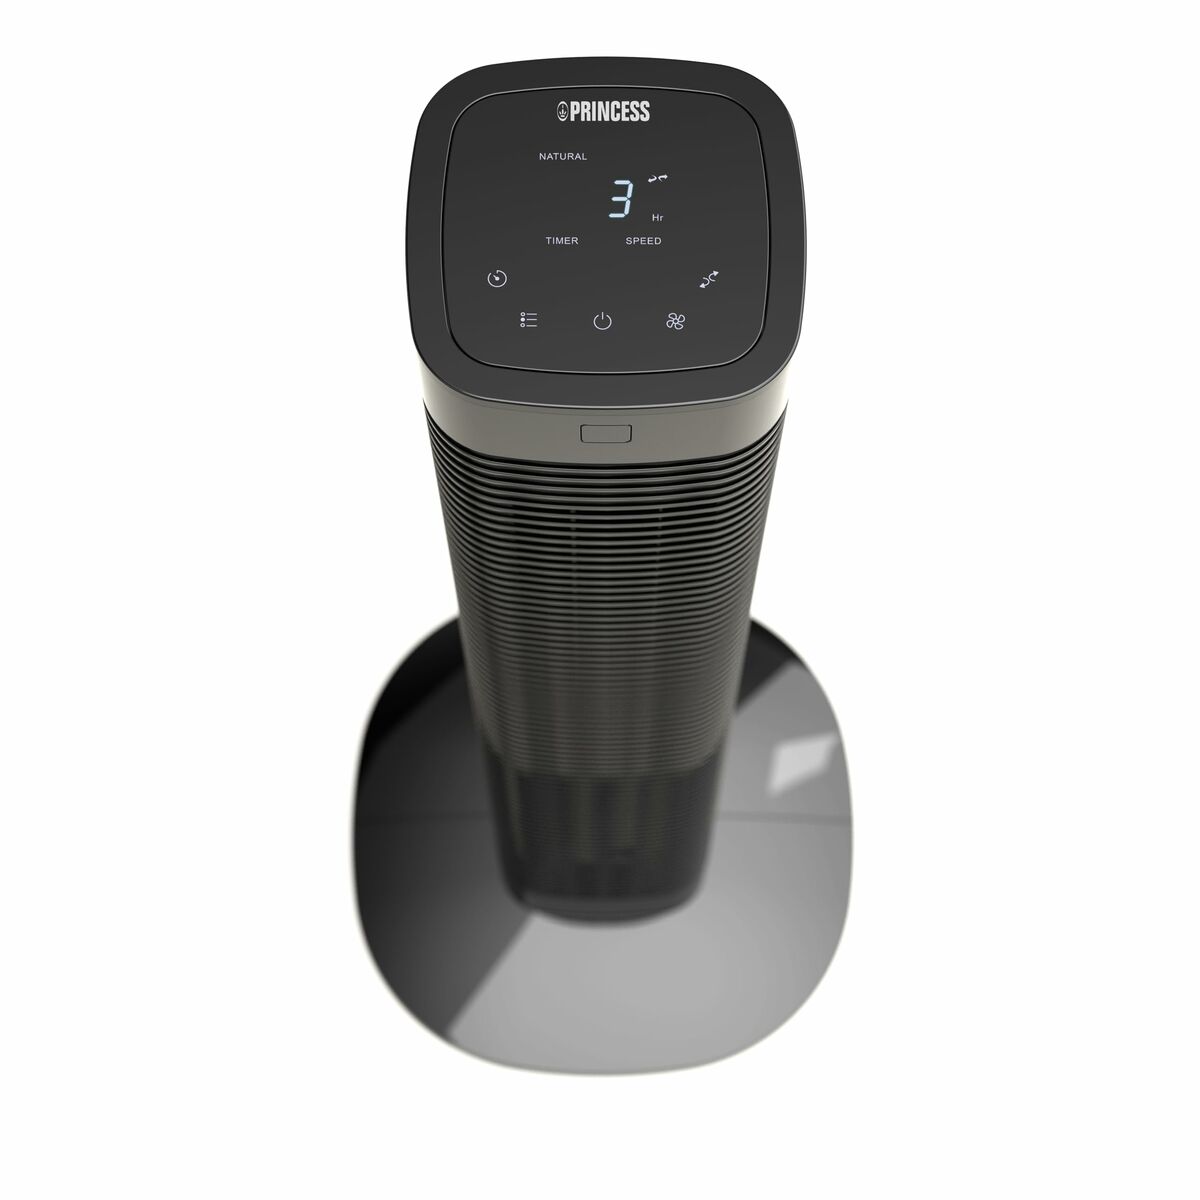 Tower Fan Princess 358230 Black 50 W, Princess, Home and cooking, Portable air conditioning, tower-fan-princess-358230-black-50-w, Brand_Princess, category-reference-2399, category-reference-2450, category-reference-2451, category-reference-t-19656, category-reference-t-21087, category-reference-t-25217, category-reference-t-29131, Condition_NEW, ferretería, Price_50 - 100, summer, RiotNook